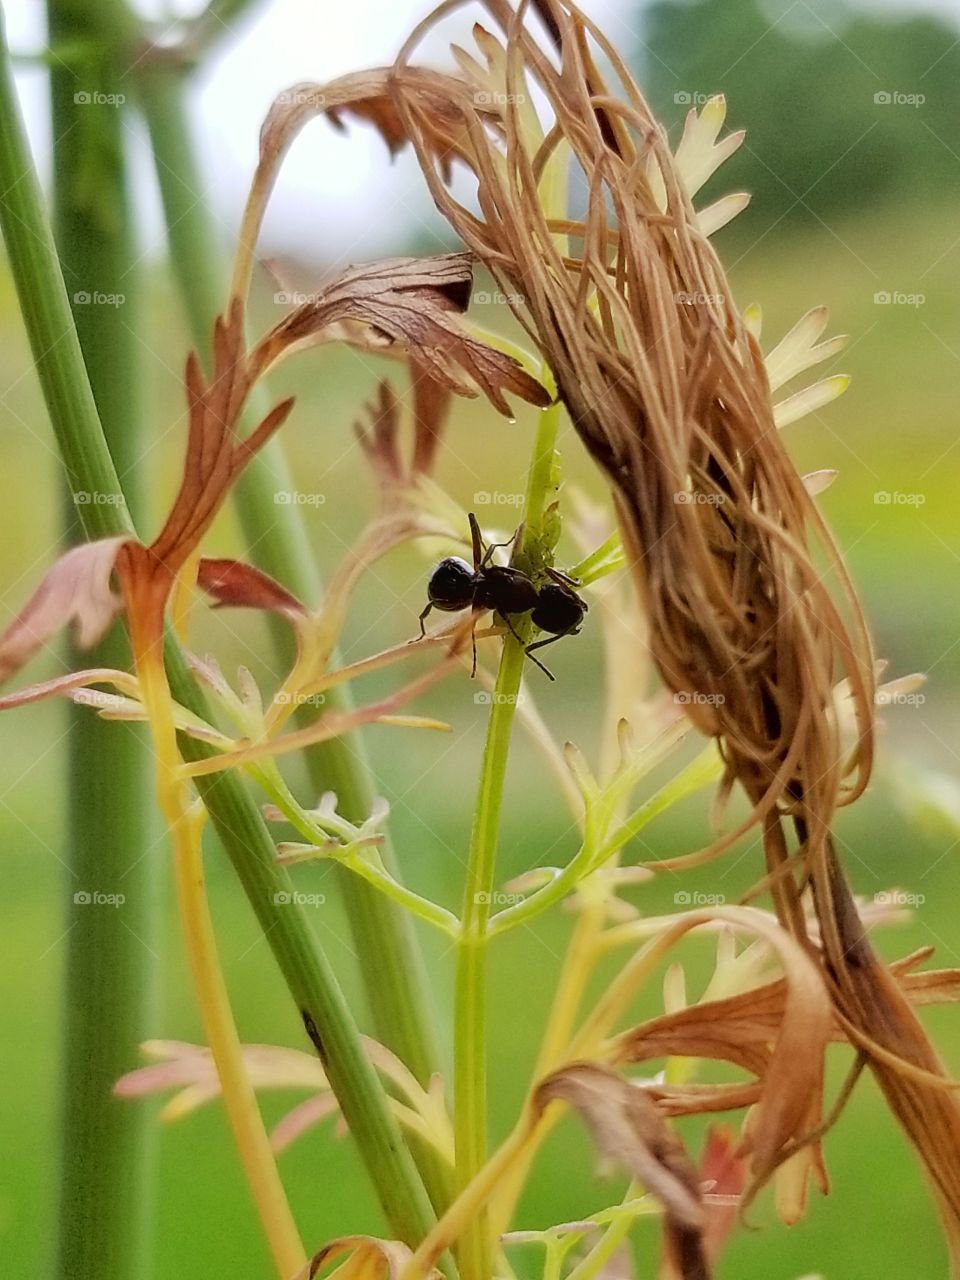 Ant in the foliage